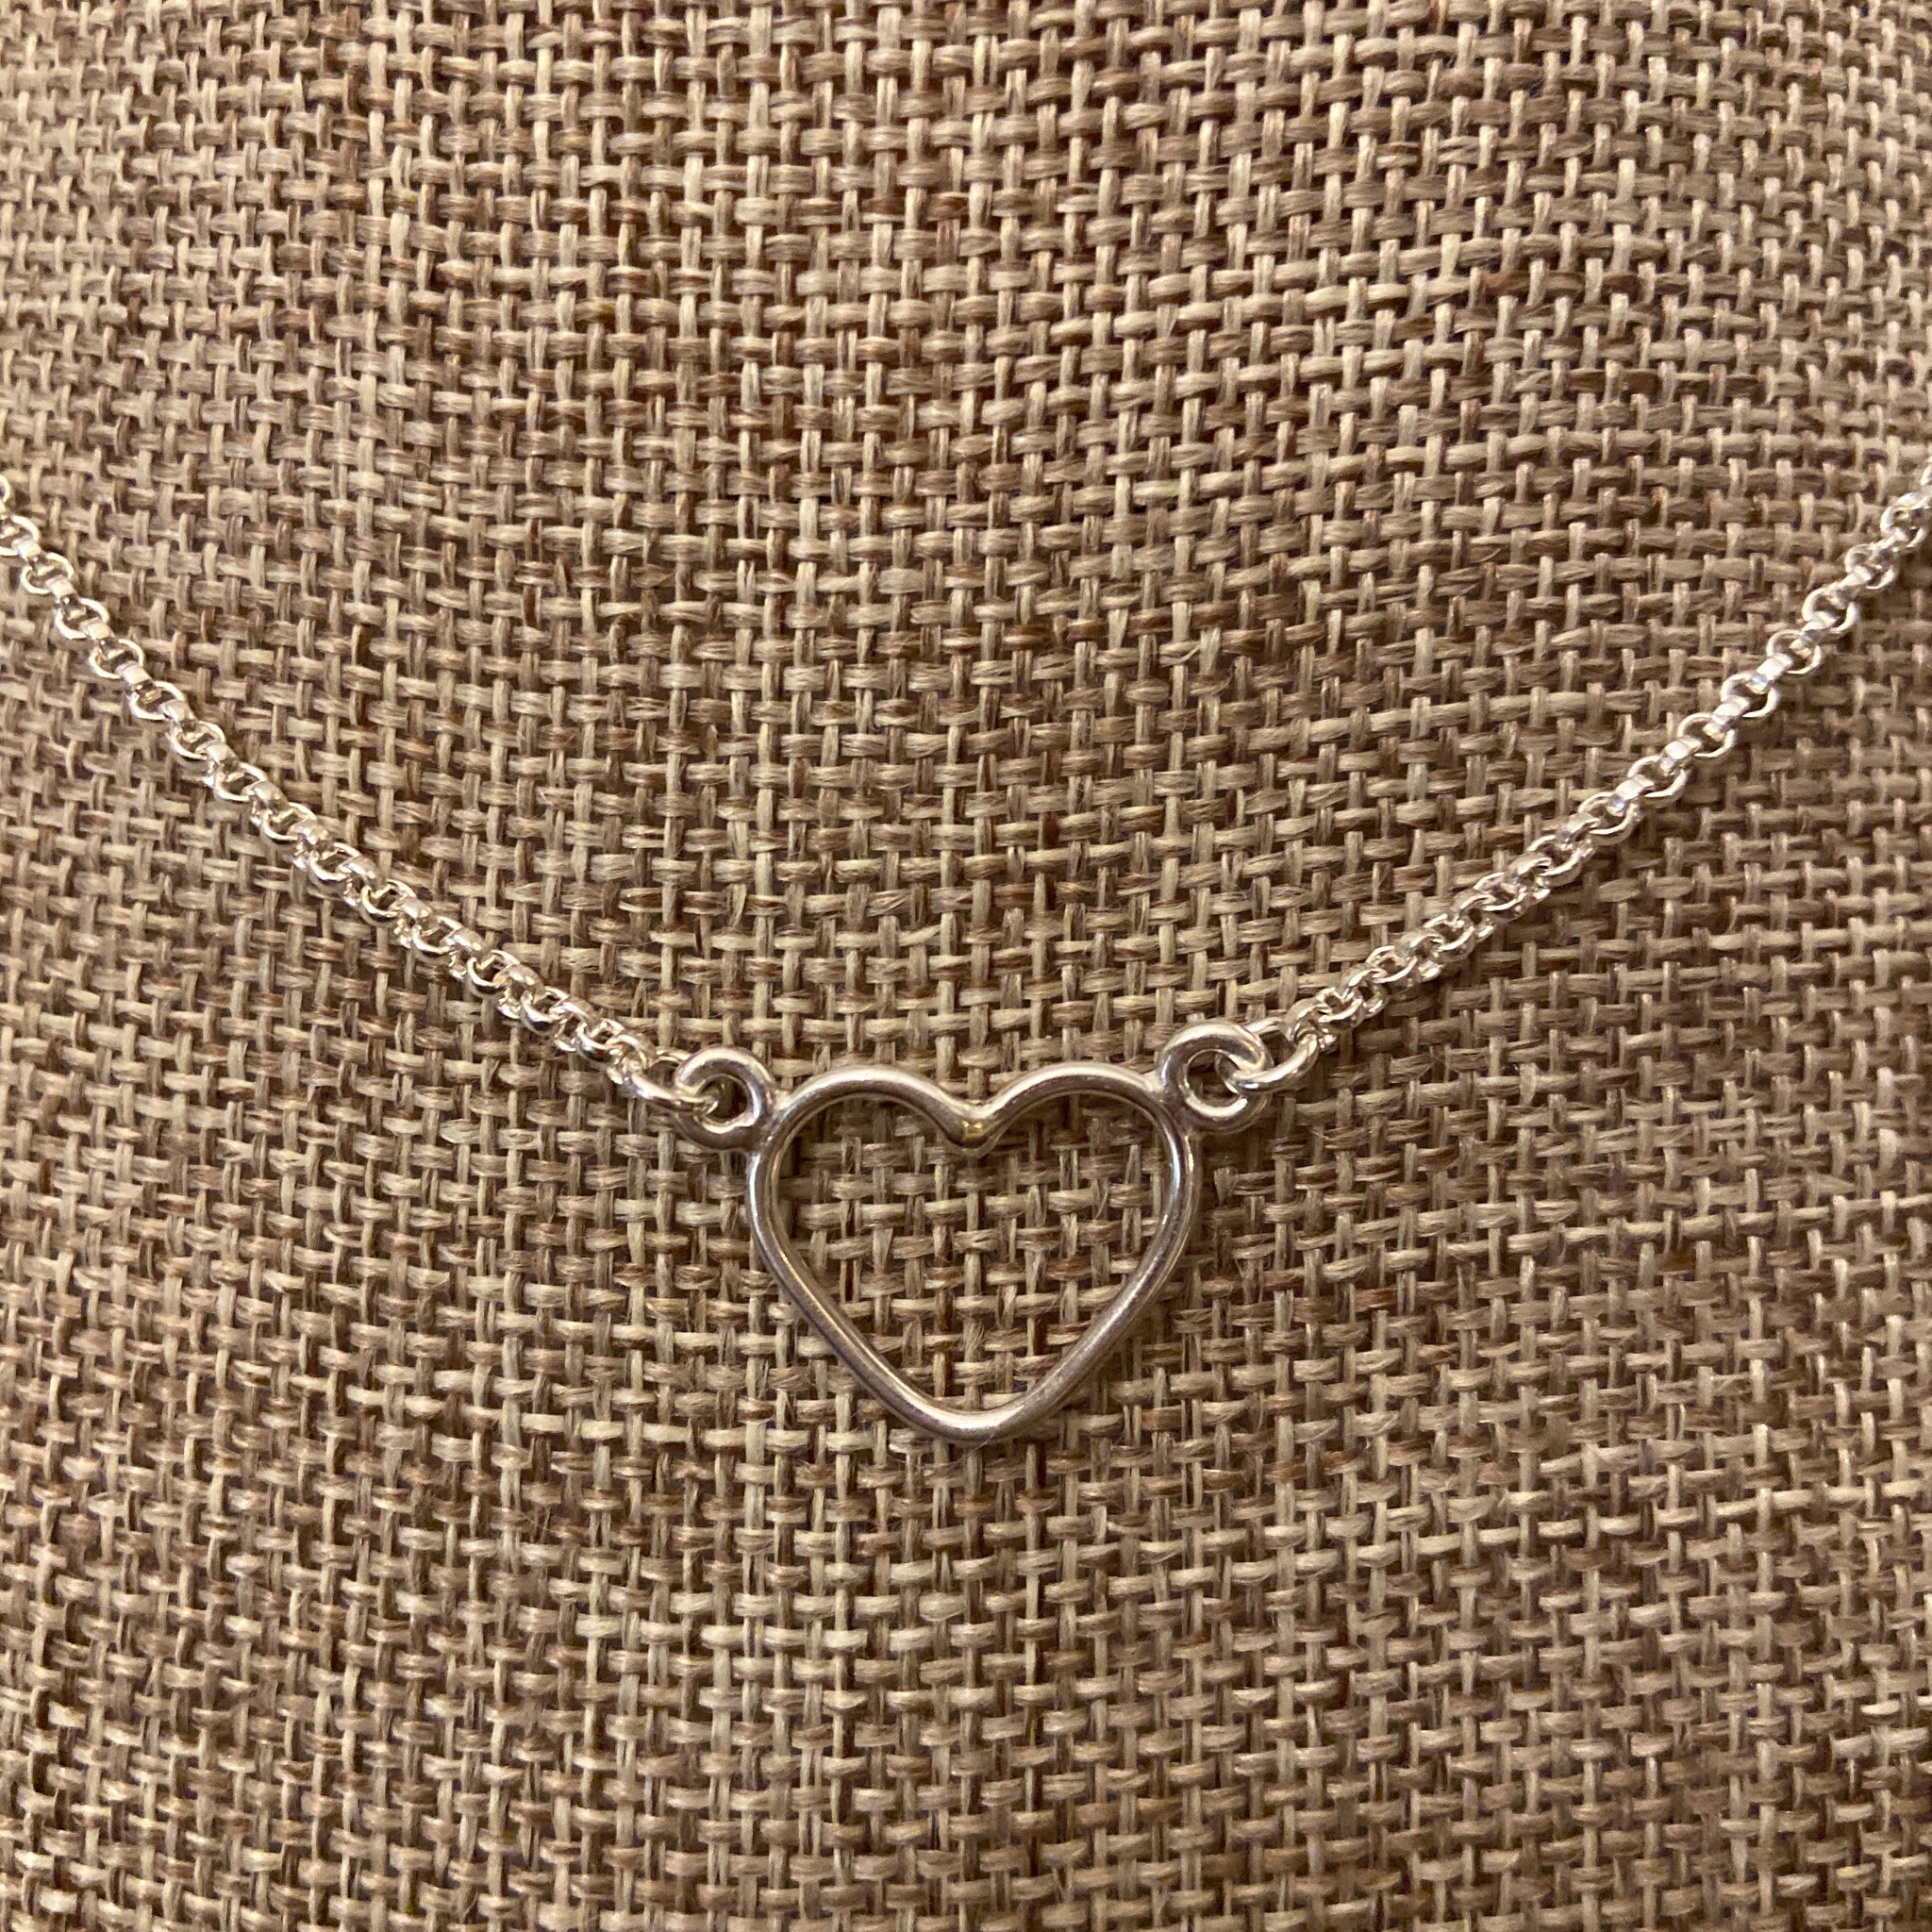 "My Heart" Necklace